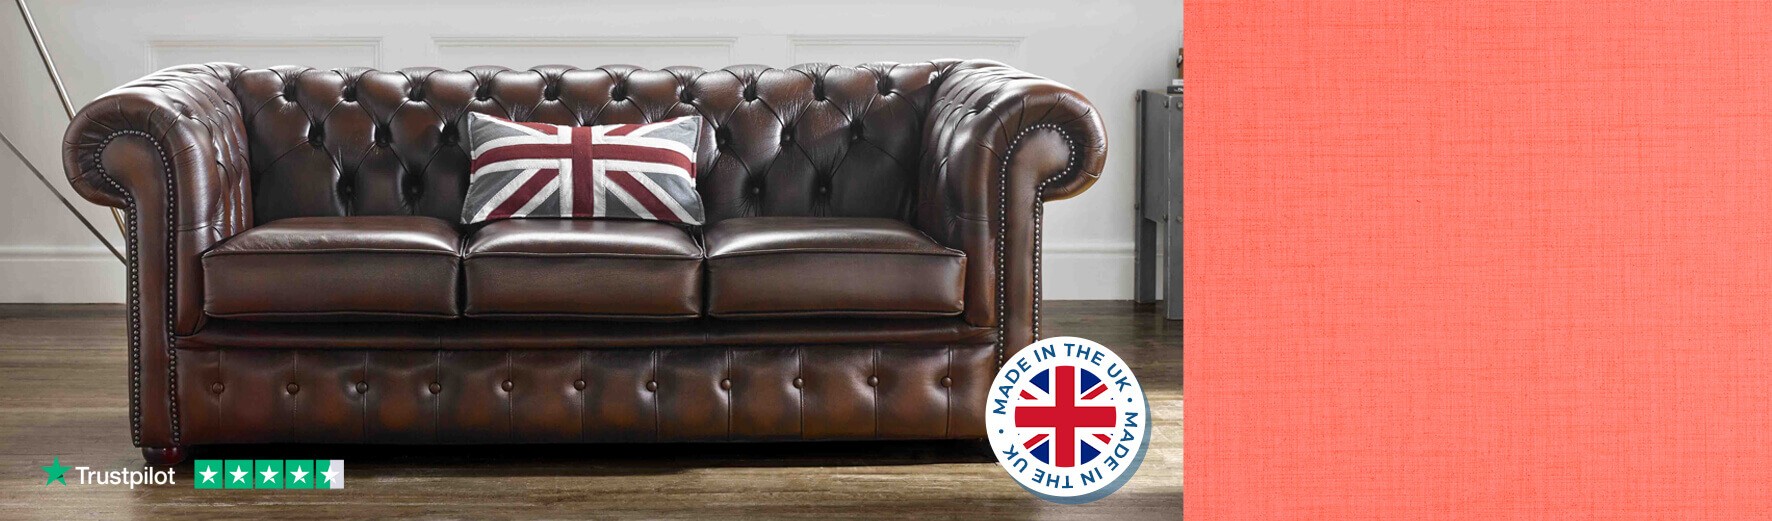 British Chesterfield Sofas Genuine Authentic Made in UK